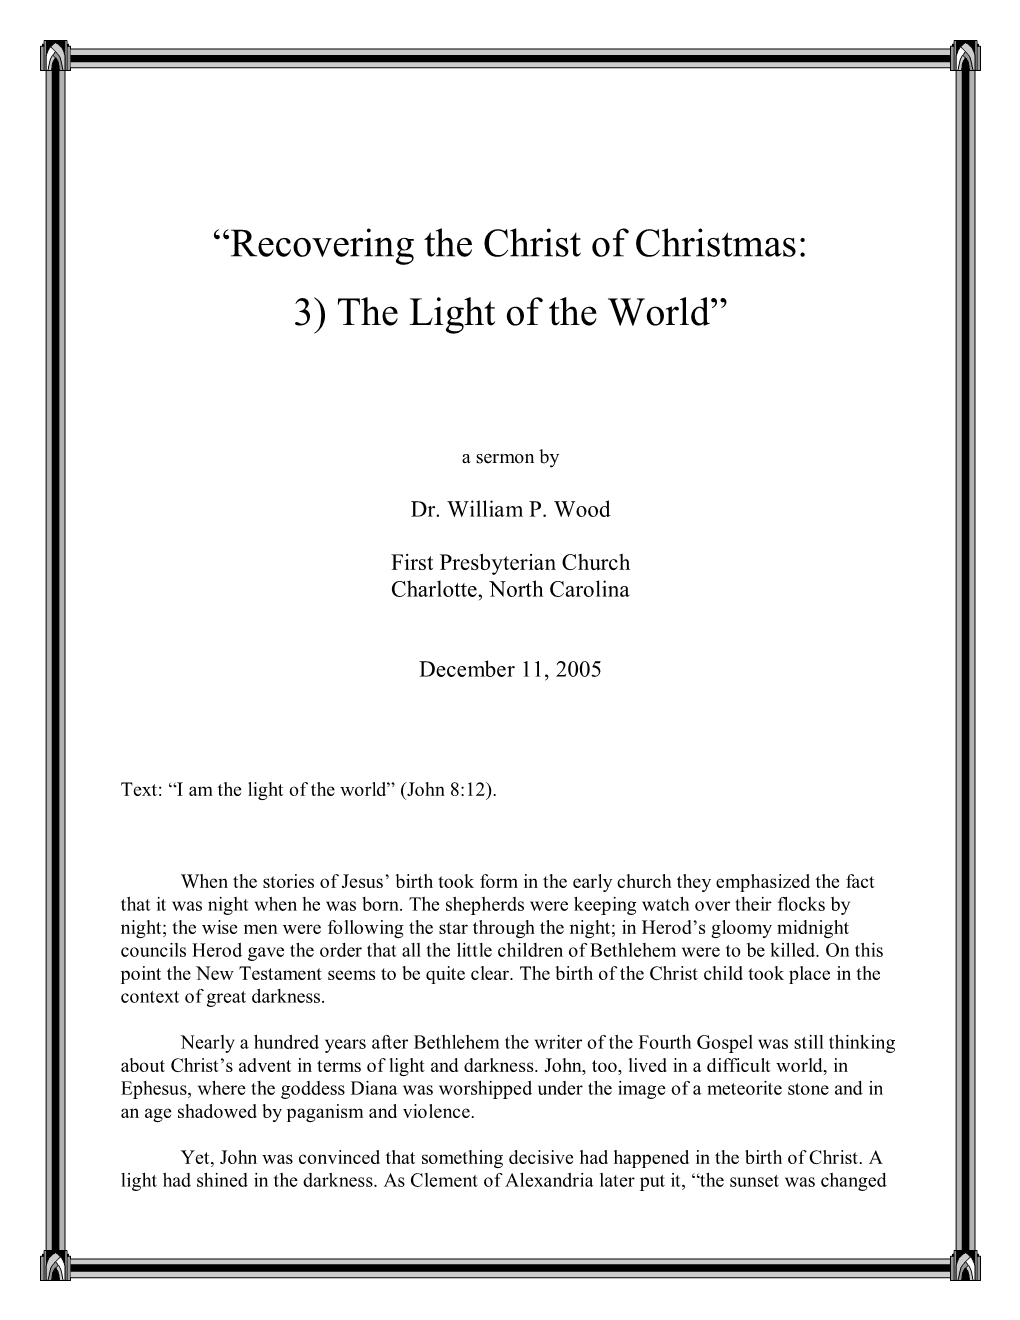 “Recovering the Christ of Christmas: 3) the Light of the World”